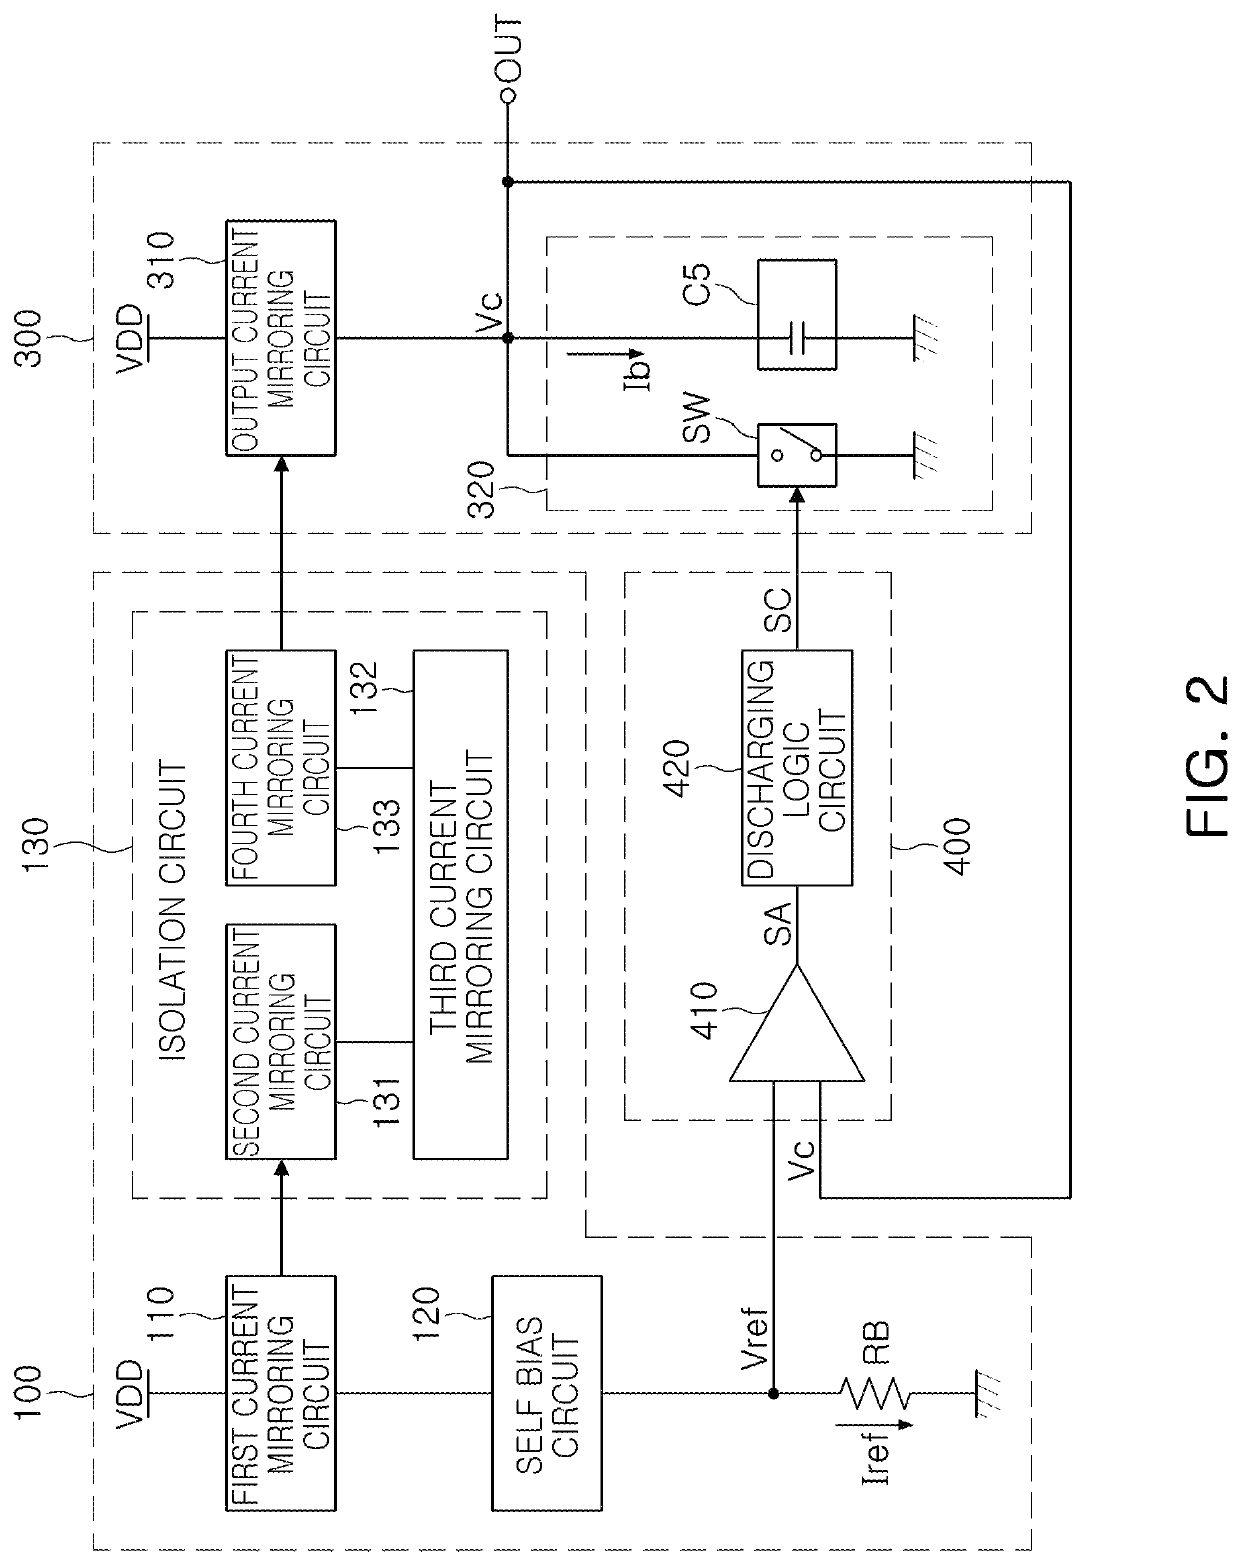 Oscillator circuit resistant to noise and jitter